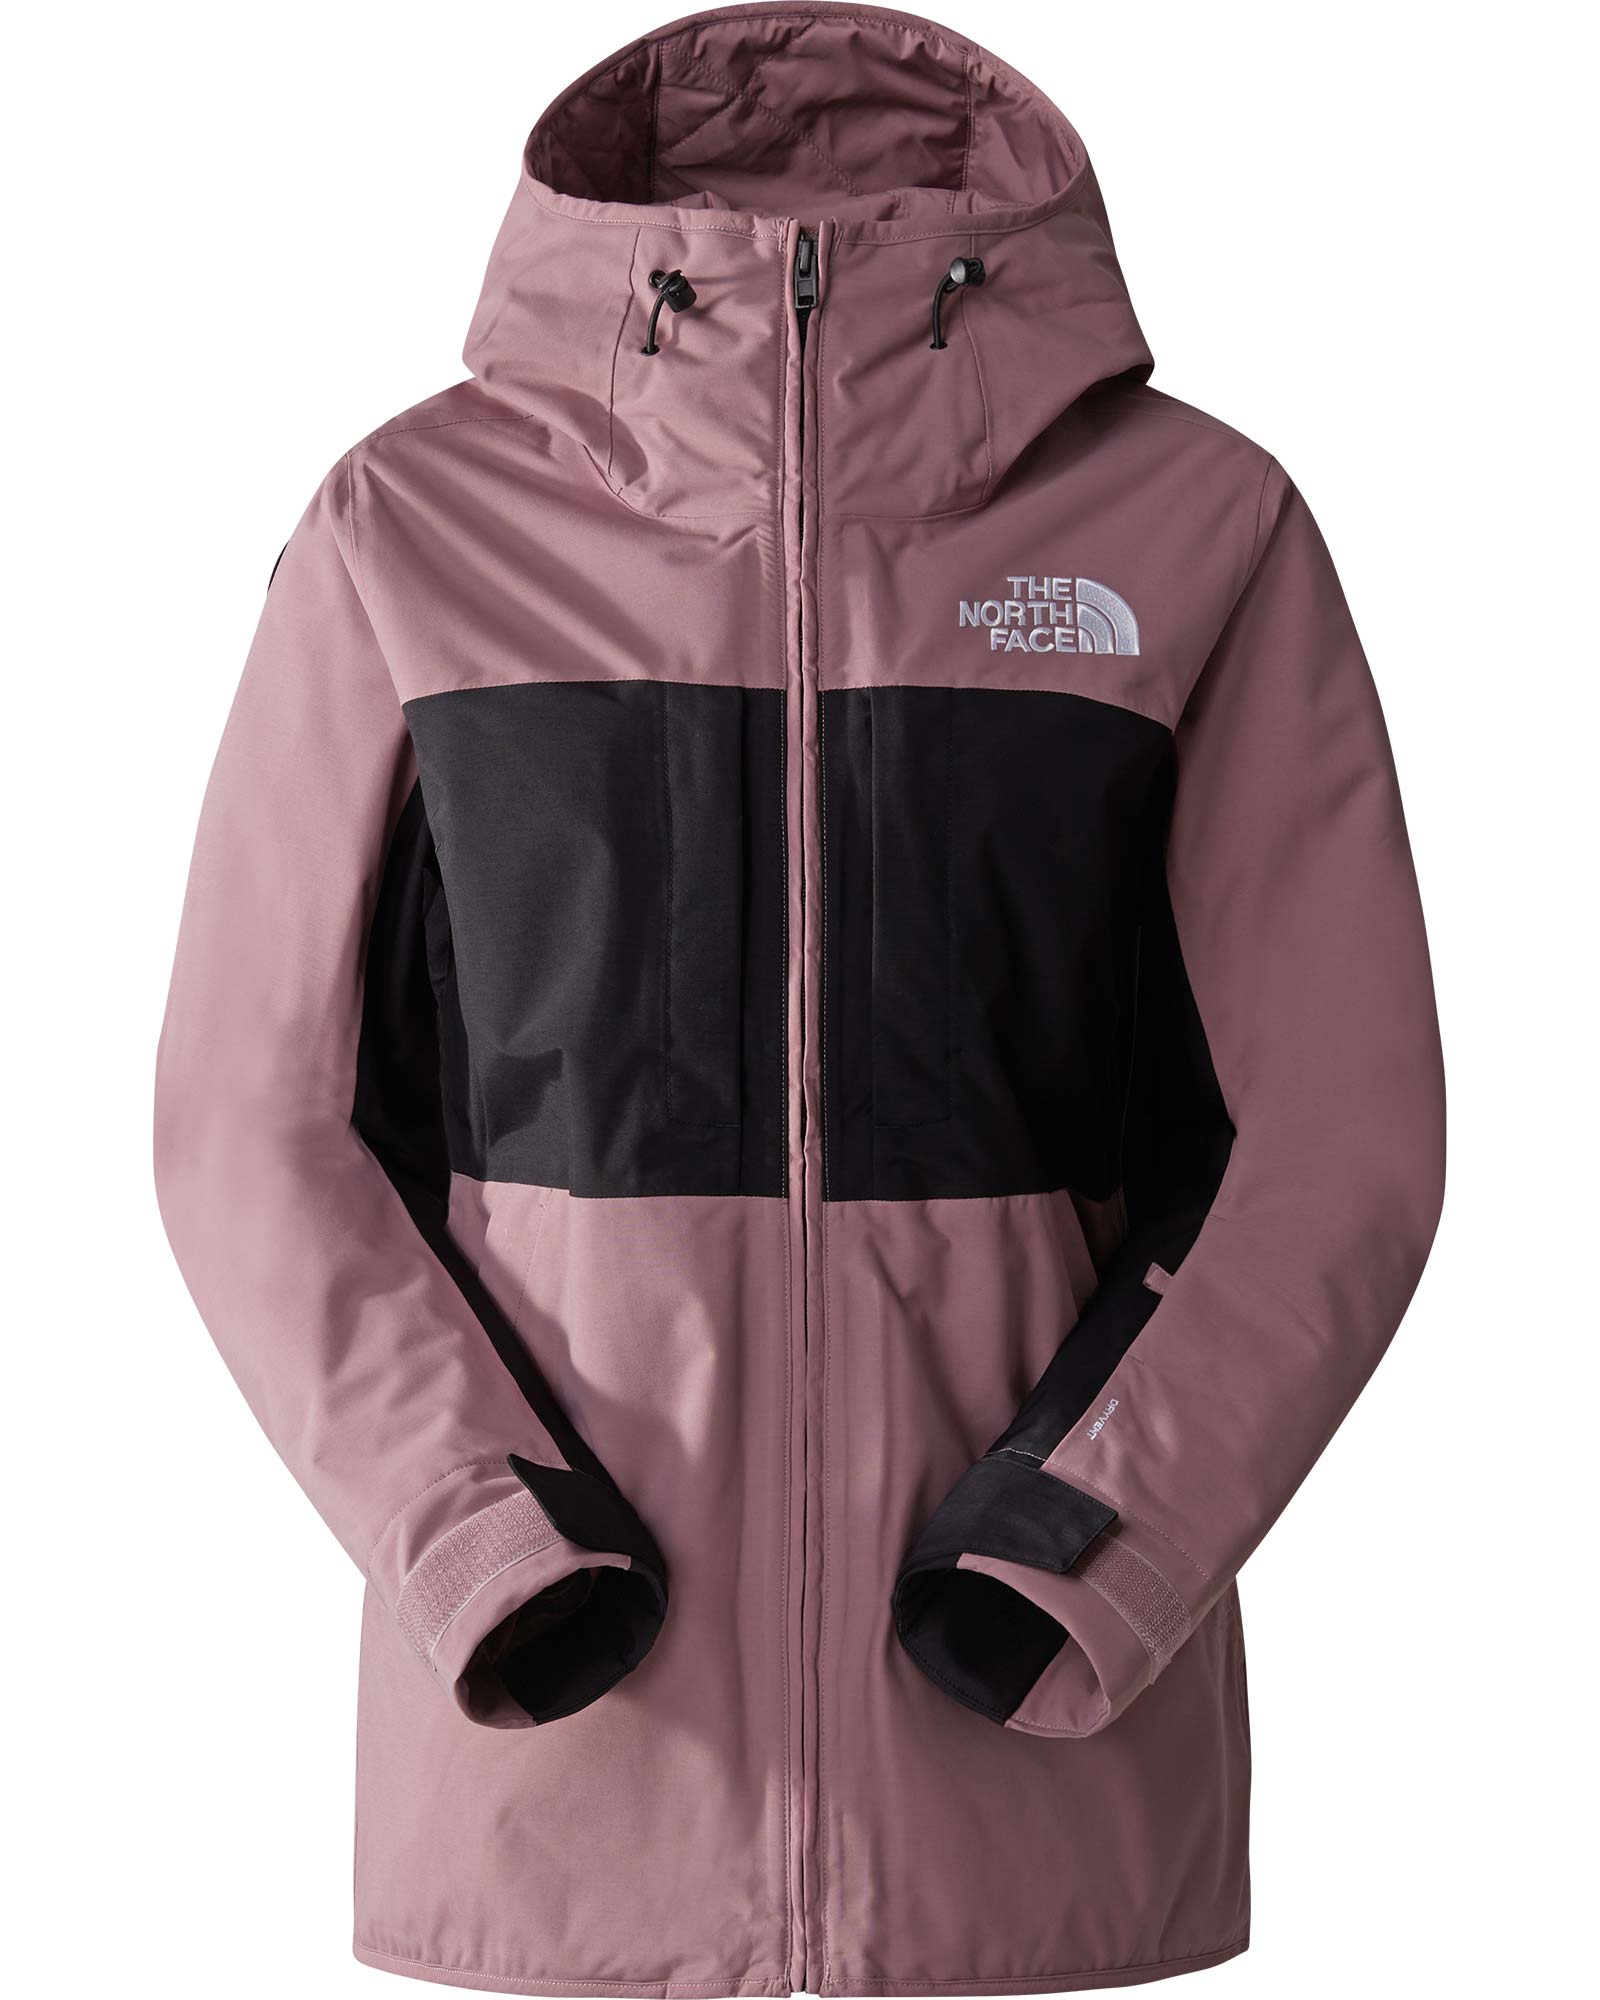 The North Face Women’s Namak Insulated Jacket - Fawn Grey/TNF Black S